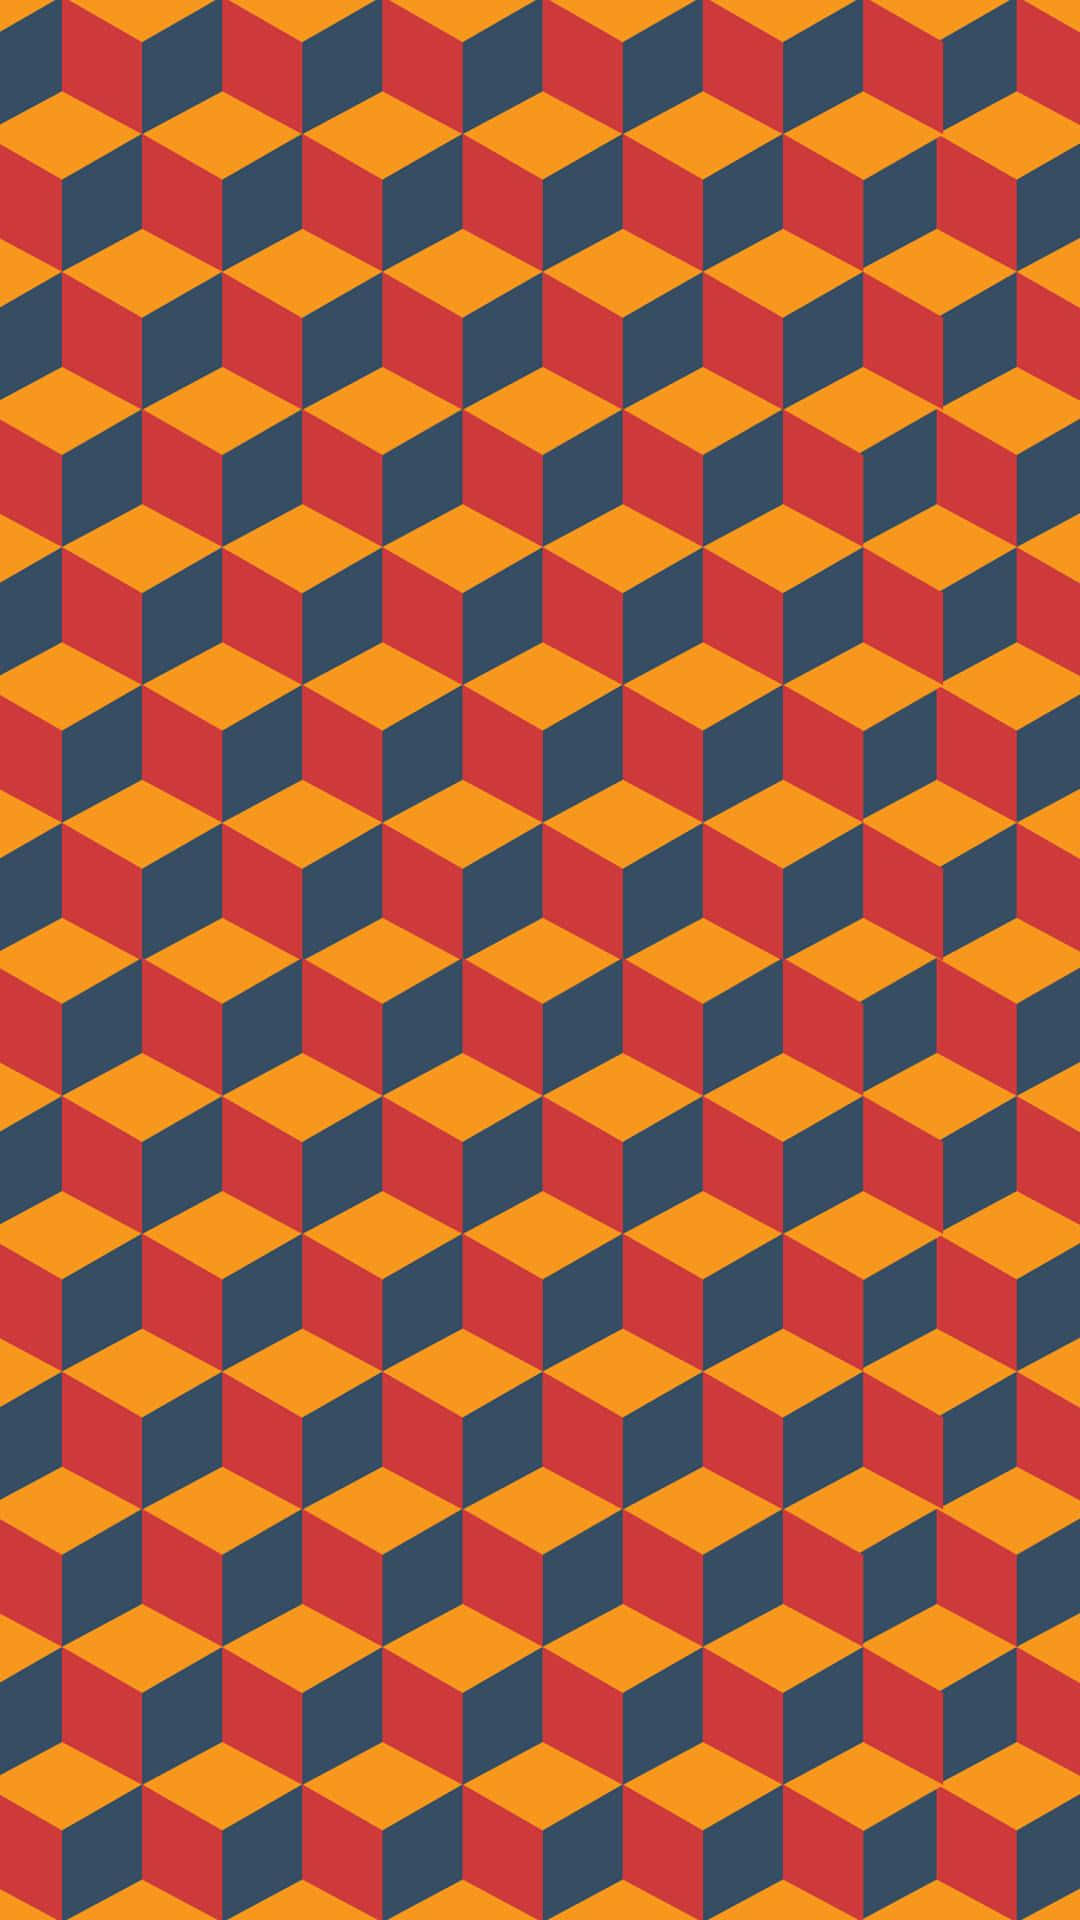 A Geometric Pattern With Orange And Blue Squares Wallpaper